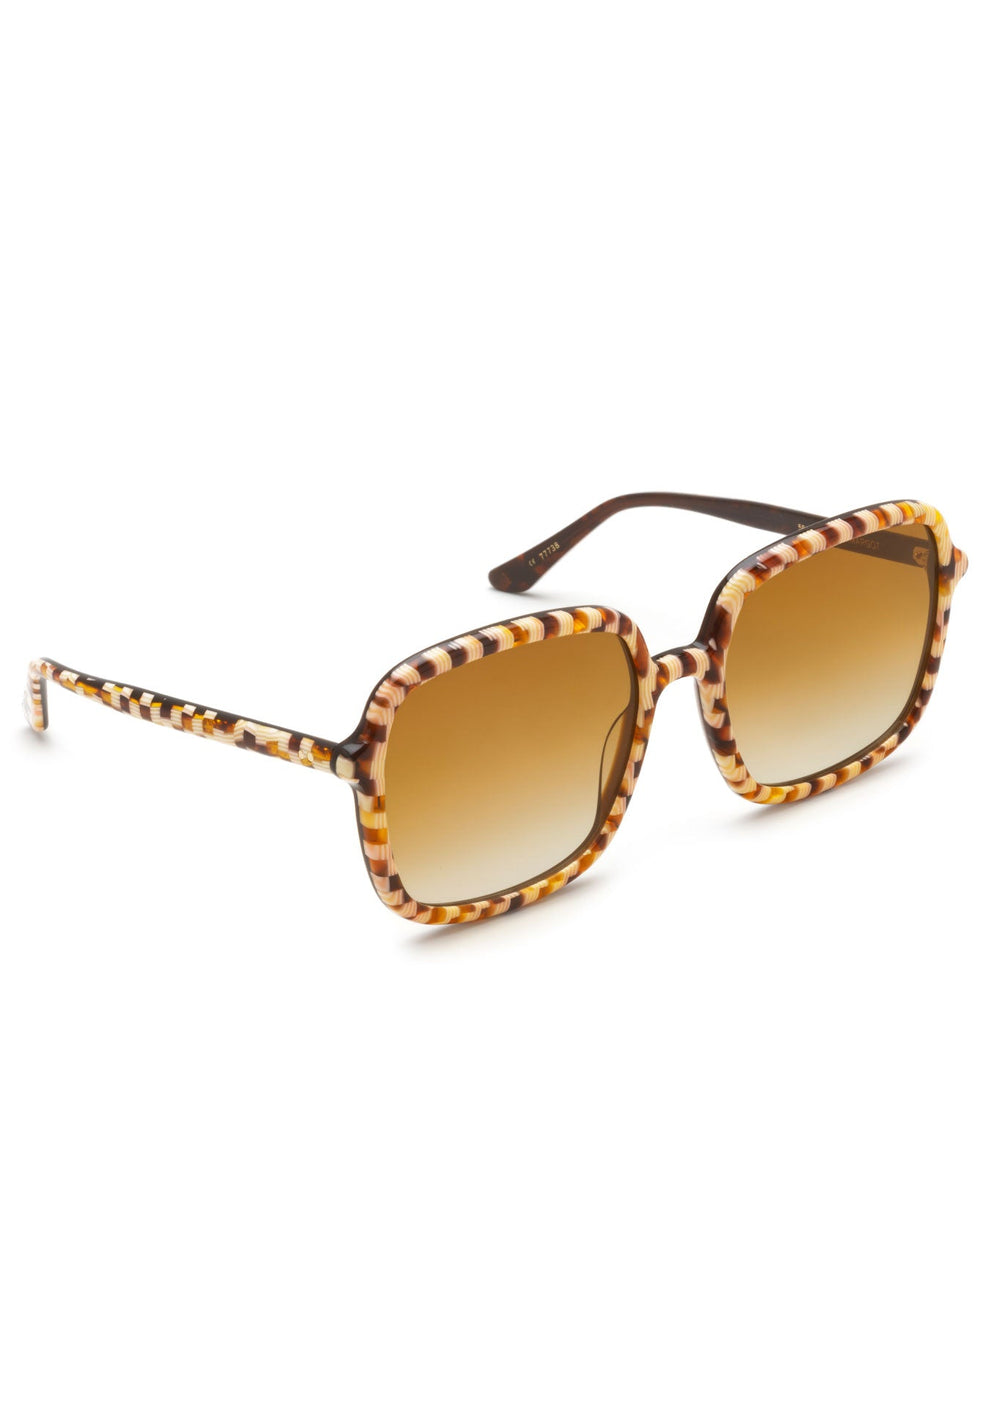 KREWE SUNGLASSES - MARGOT | Caffe Dolce + Custom Vanity Tint handcrafted, luxury oversized square checkered sunglasses with orange tinted lenses